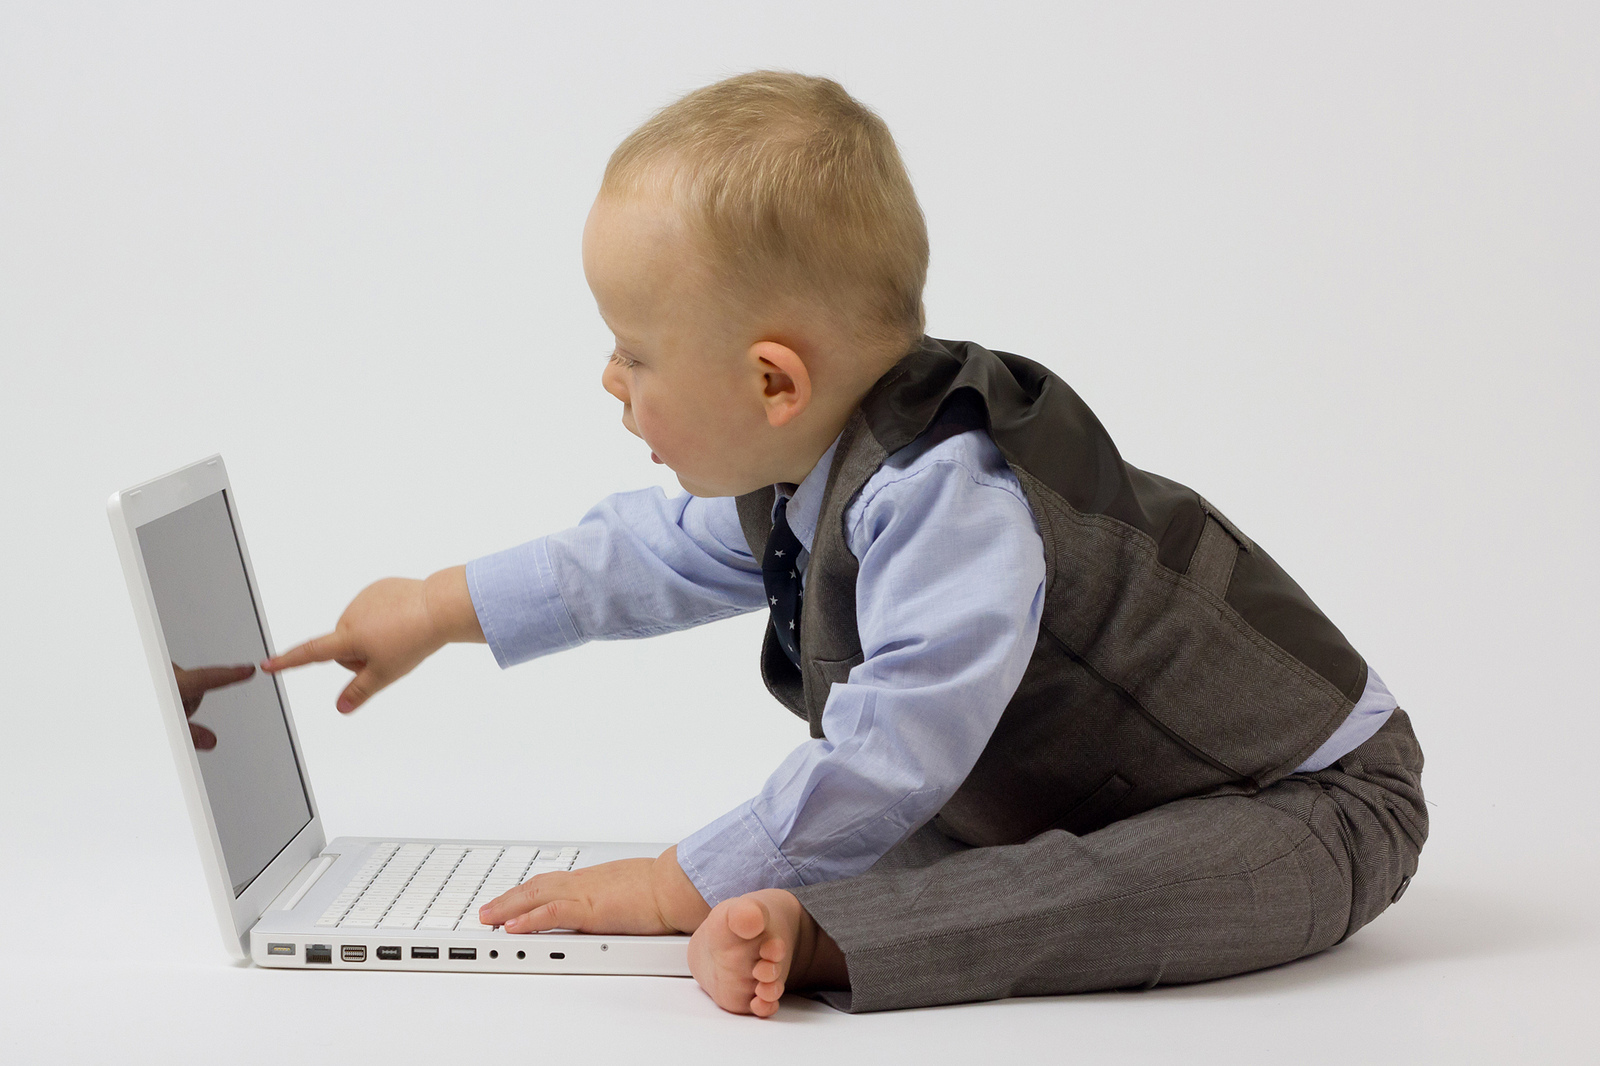 A baby in business attire pointing at a laptop, published to 